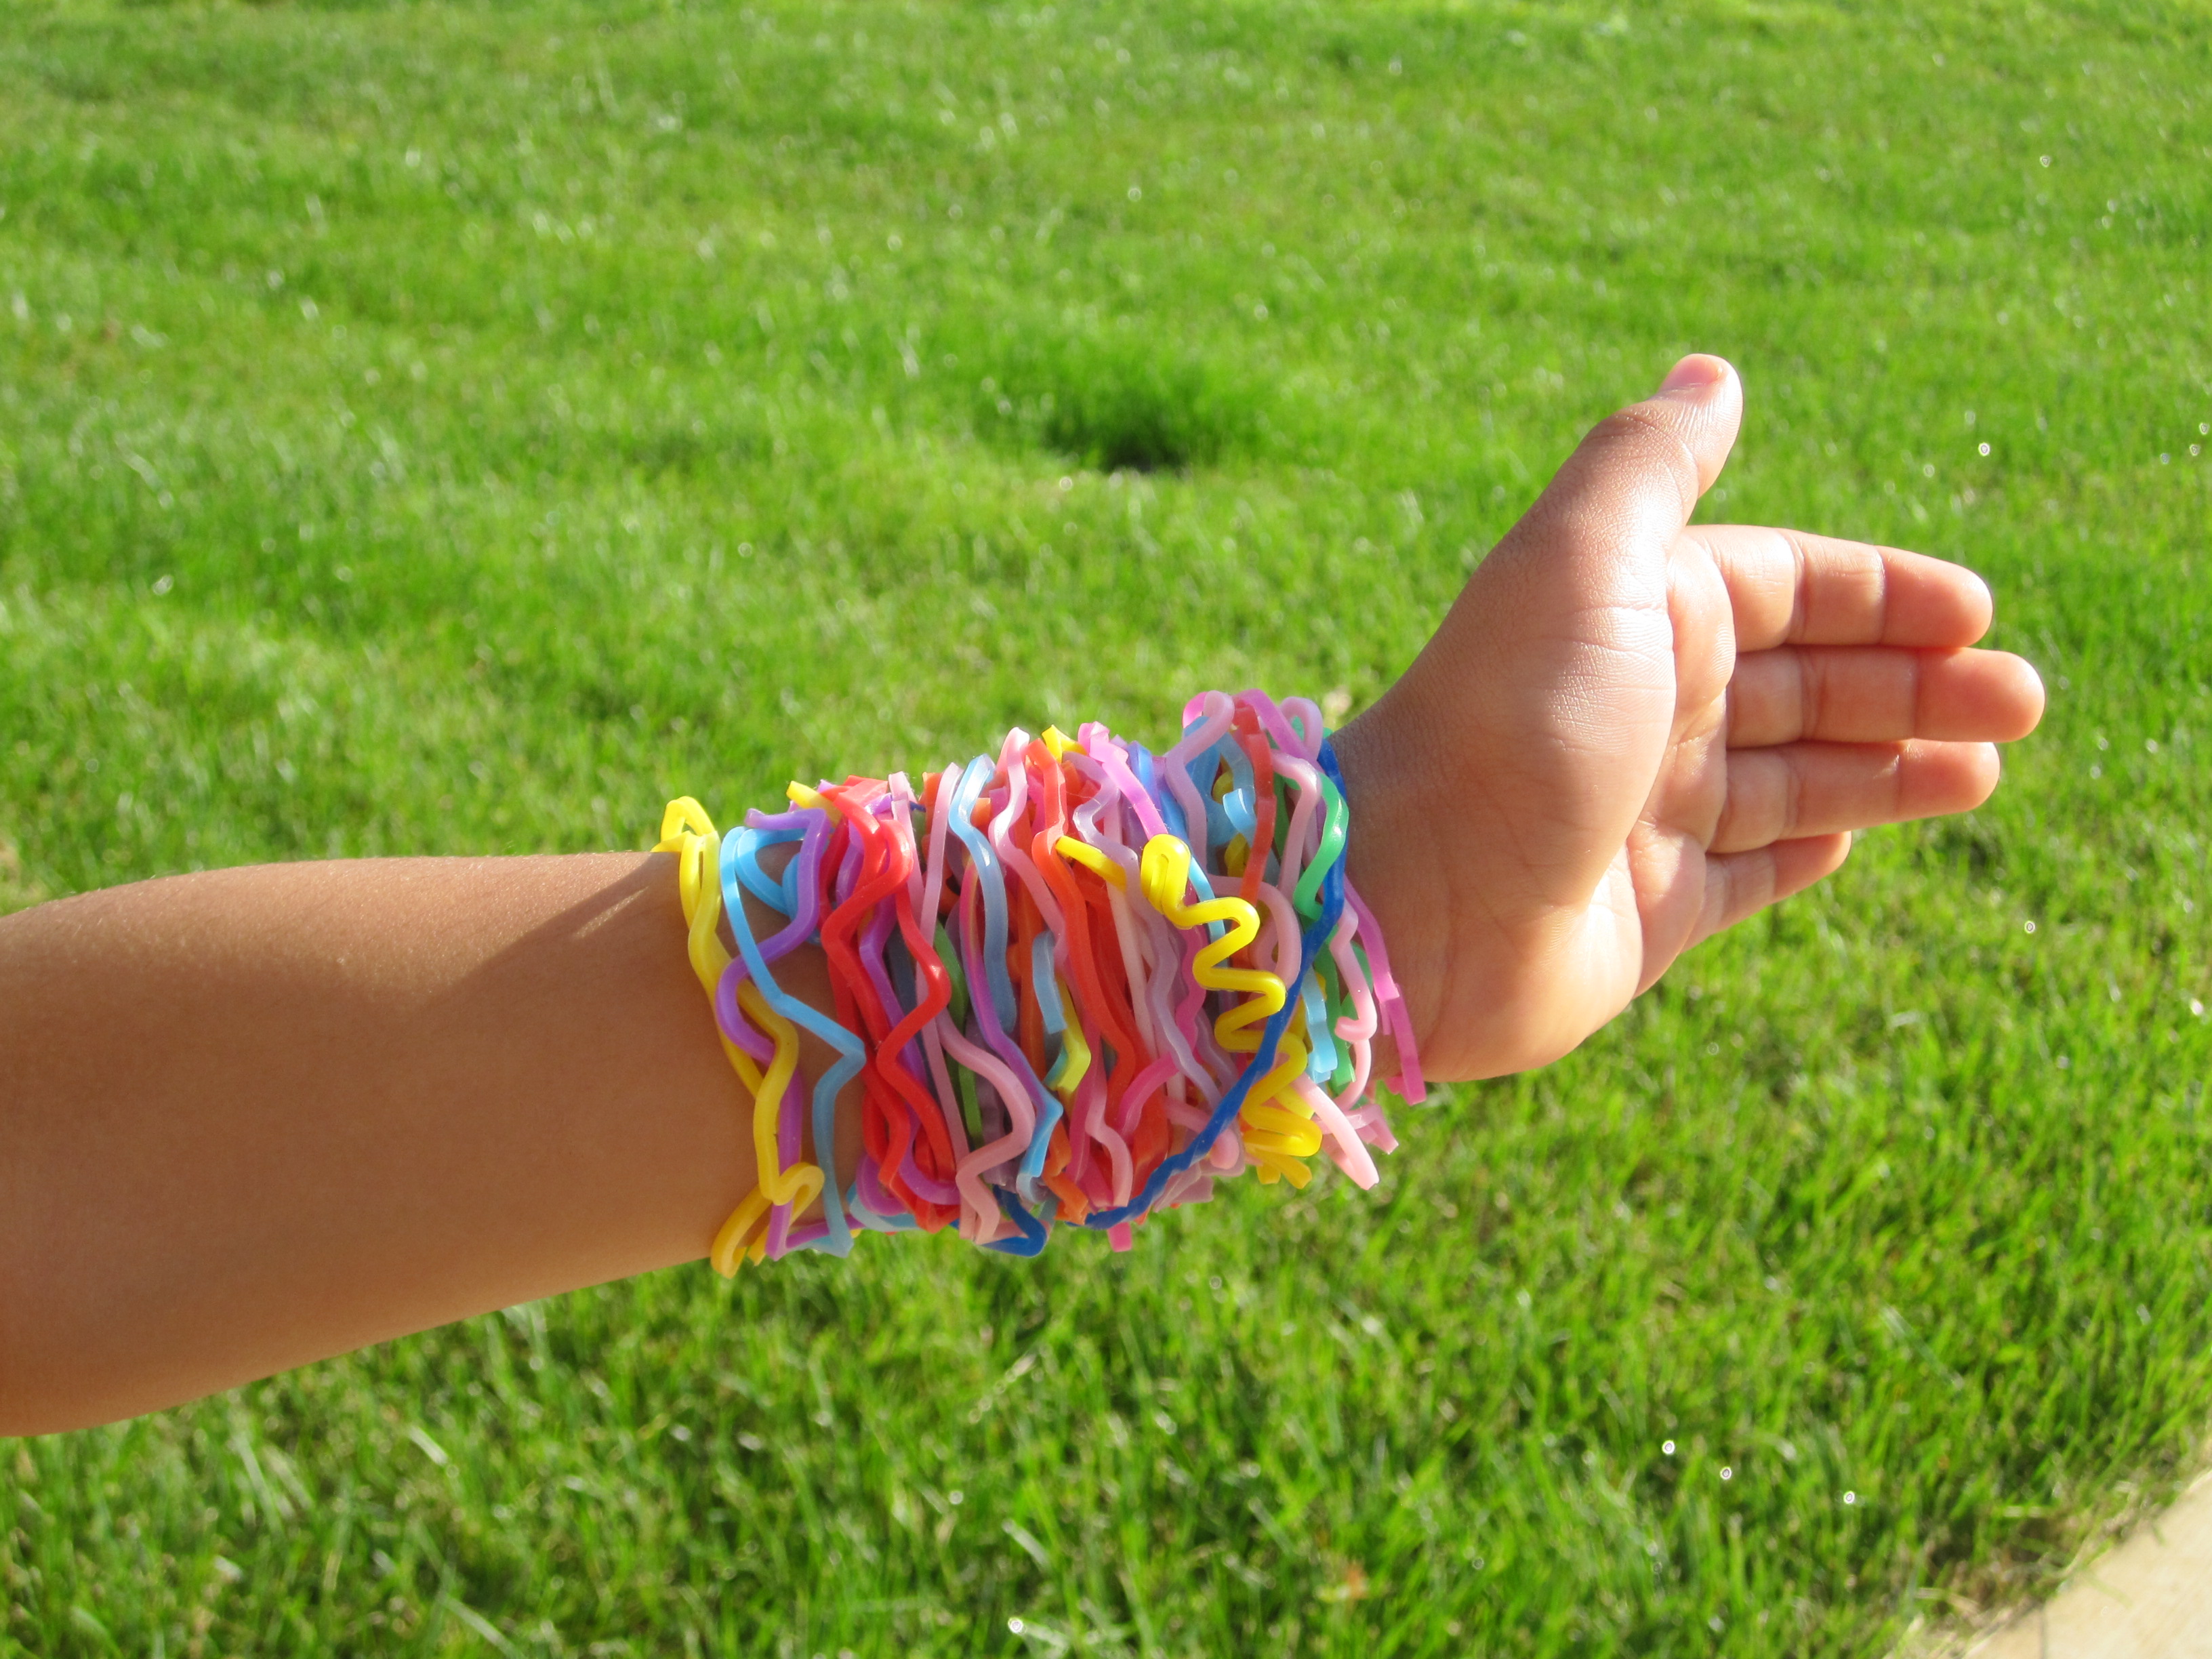 Silly Bandz: Could The Perfect Toy Save America? - Rohit Bhargava